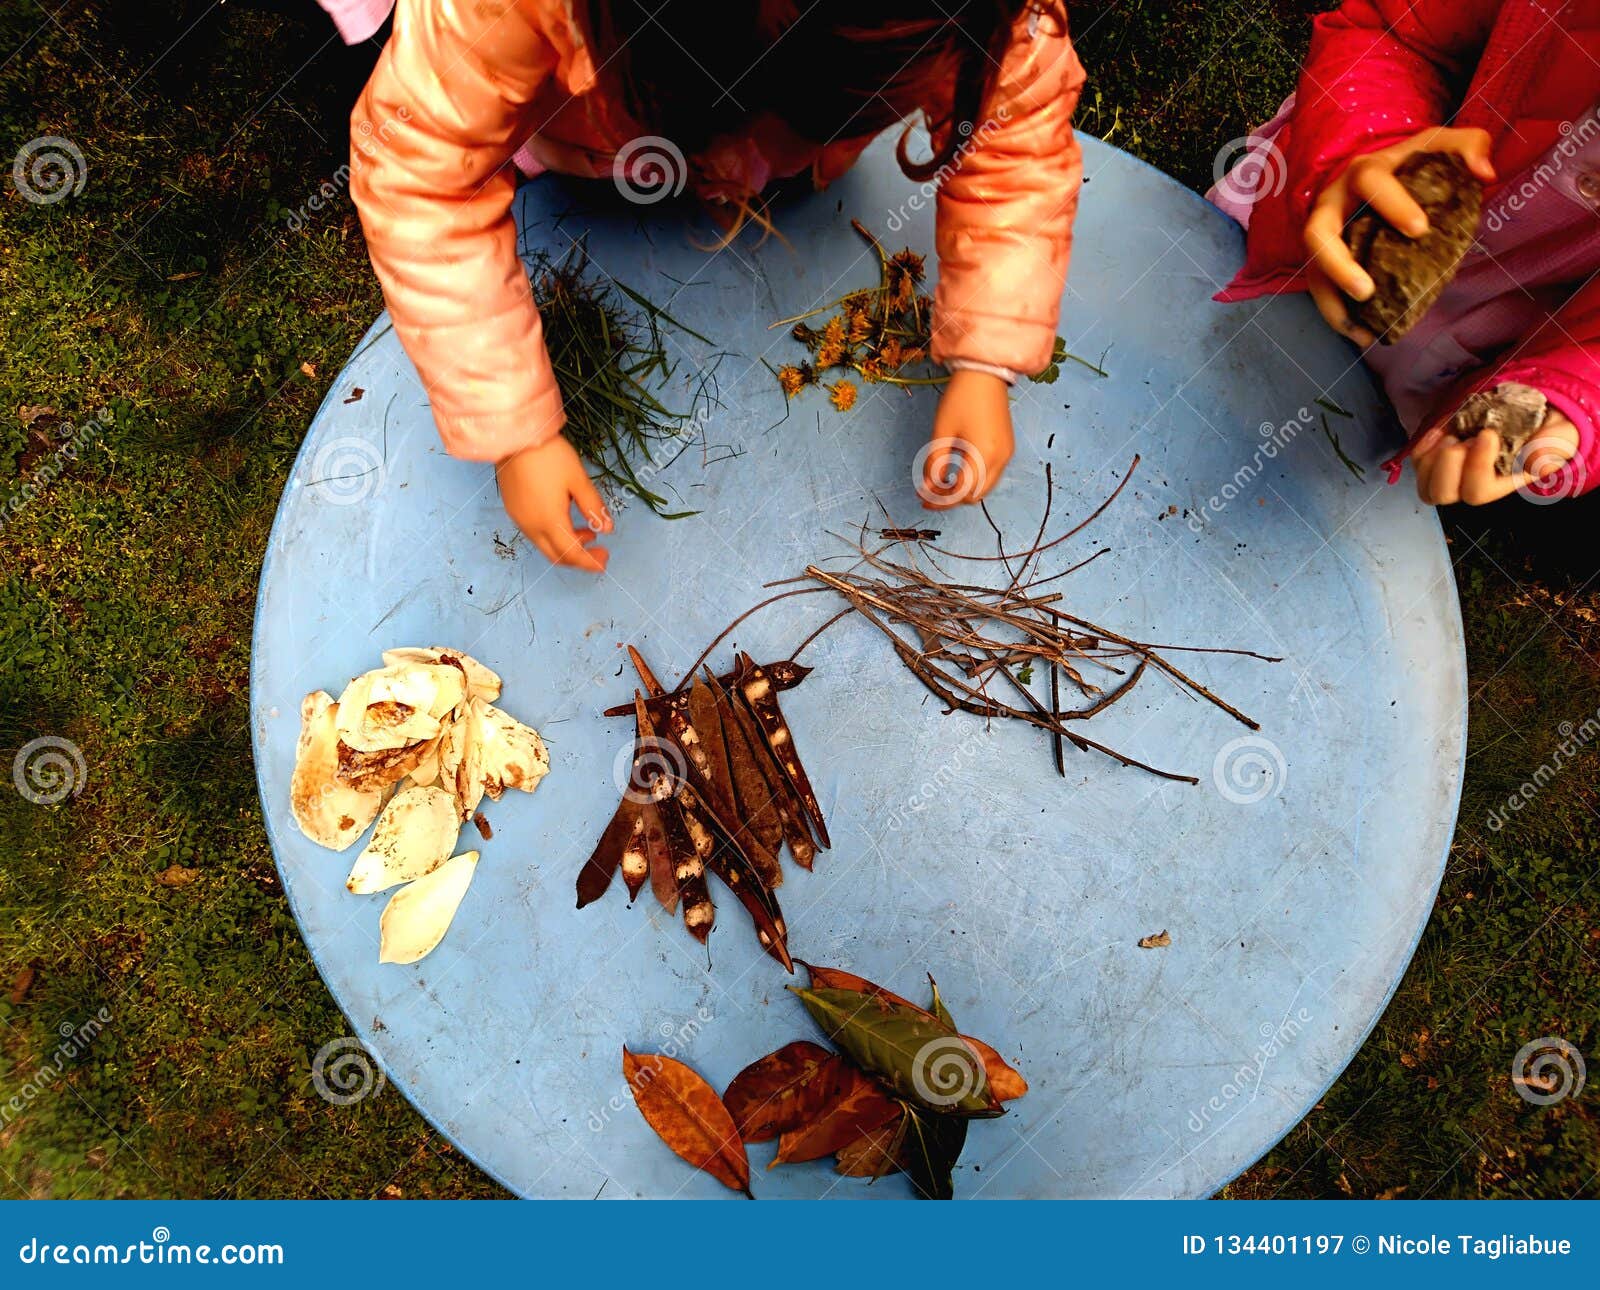 little children playing, expolring and gardening in the garden with soil, leaves, nuts, sticks, plants, seeds during a school